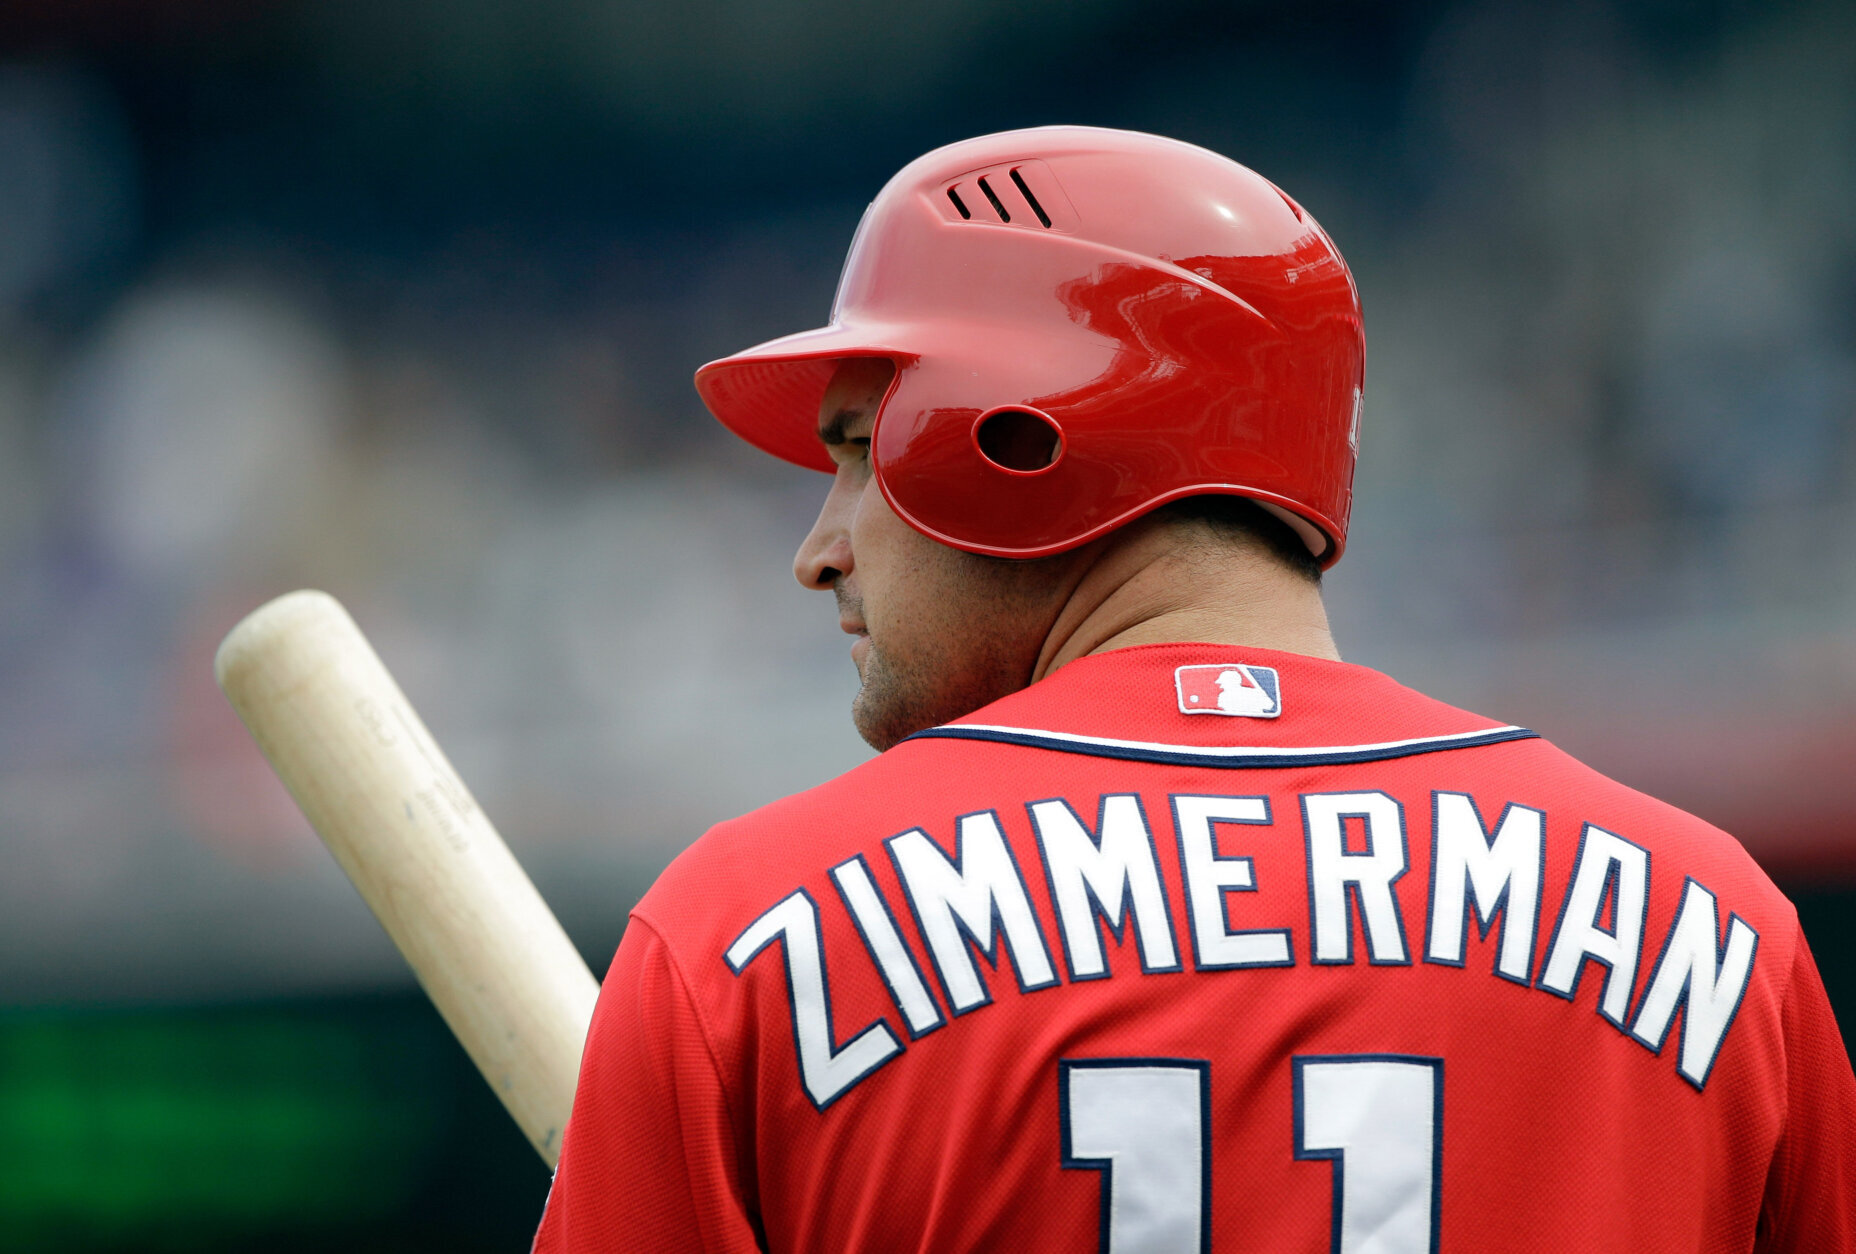 <h4>5. Going Deep</h4>
<p>Zim’s 284 home runs is a franchise record. His lone three-homer game came on May 29, 2013 at Baltimore as he went 3 for 4 with four RBI against the Orioles in a 9-6 loss (Jordan Zimmerman allowing seven runs over six innings to take the L).</p>
<p>His best season? In 2017, when after being limited to 156 games the previous two years due to injuries, the 32-year old belted 36 round-trippers for the NL East champs.</p>
